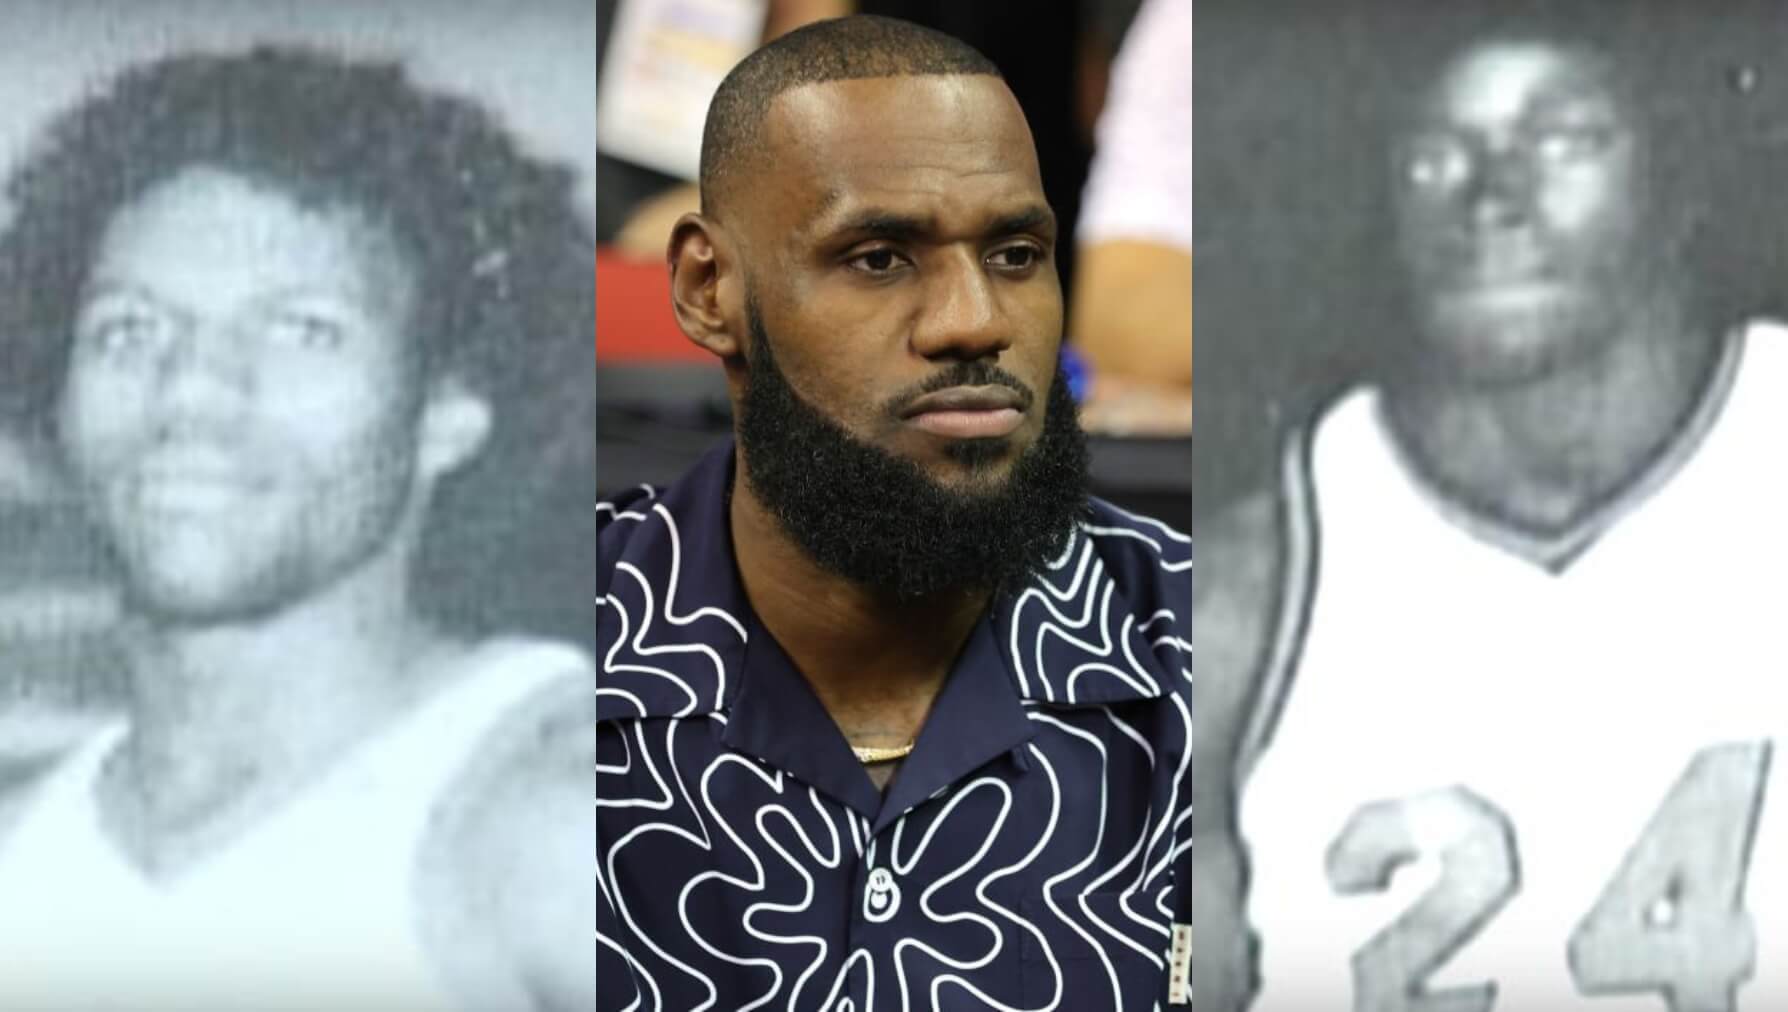 LeBron James and his dad, Anthony McClelland